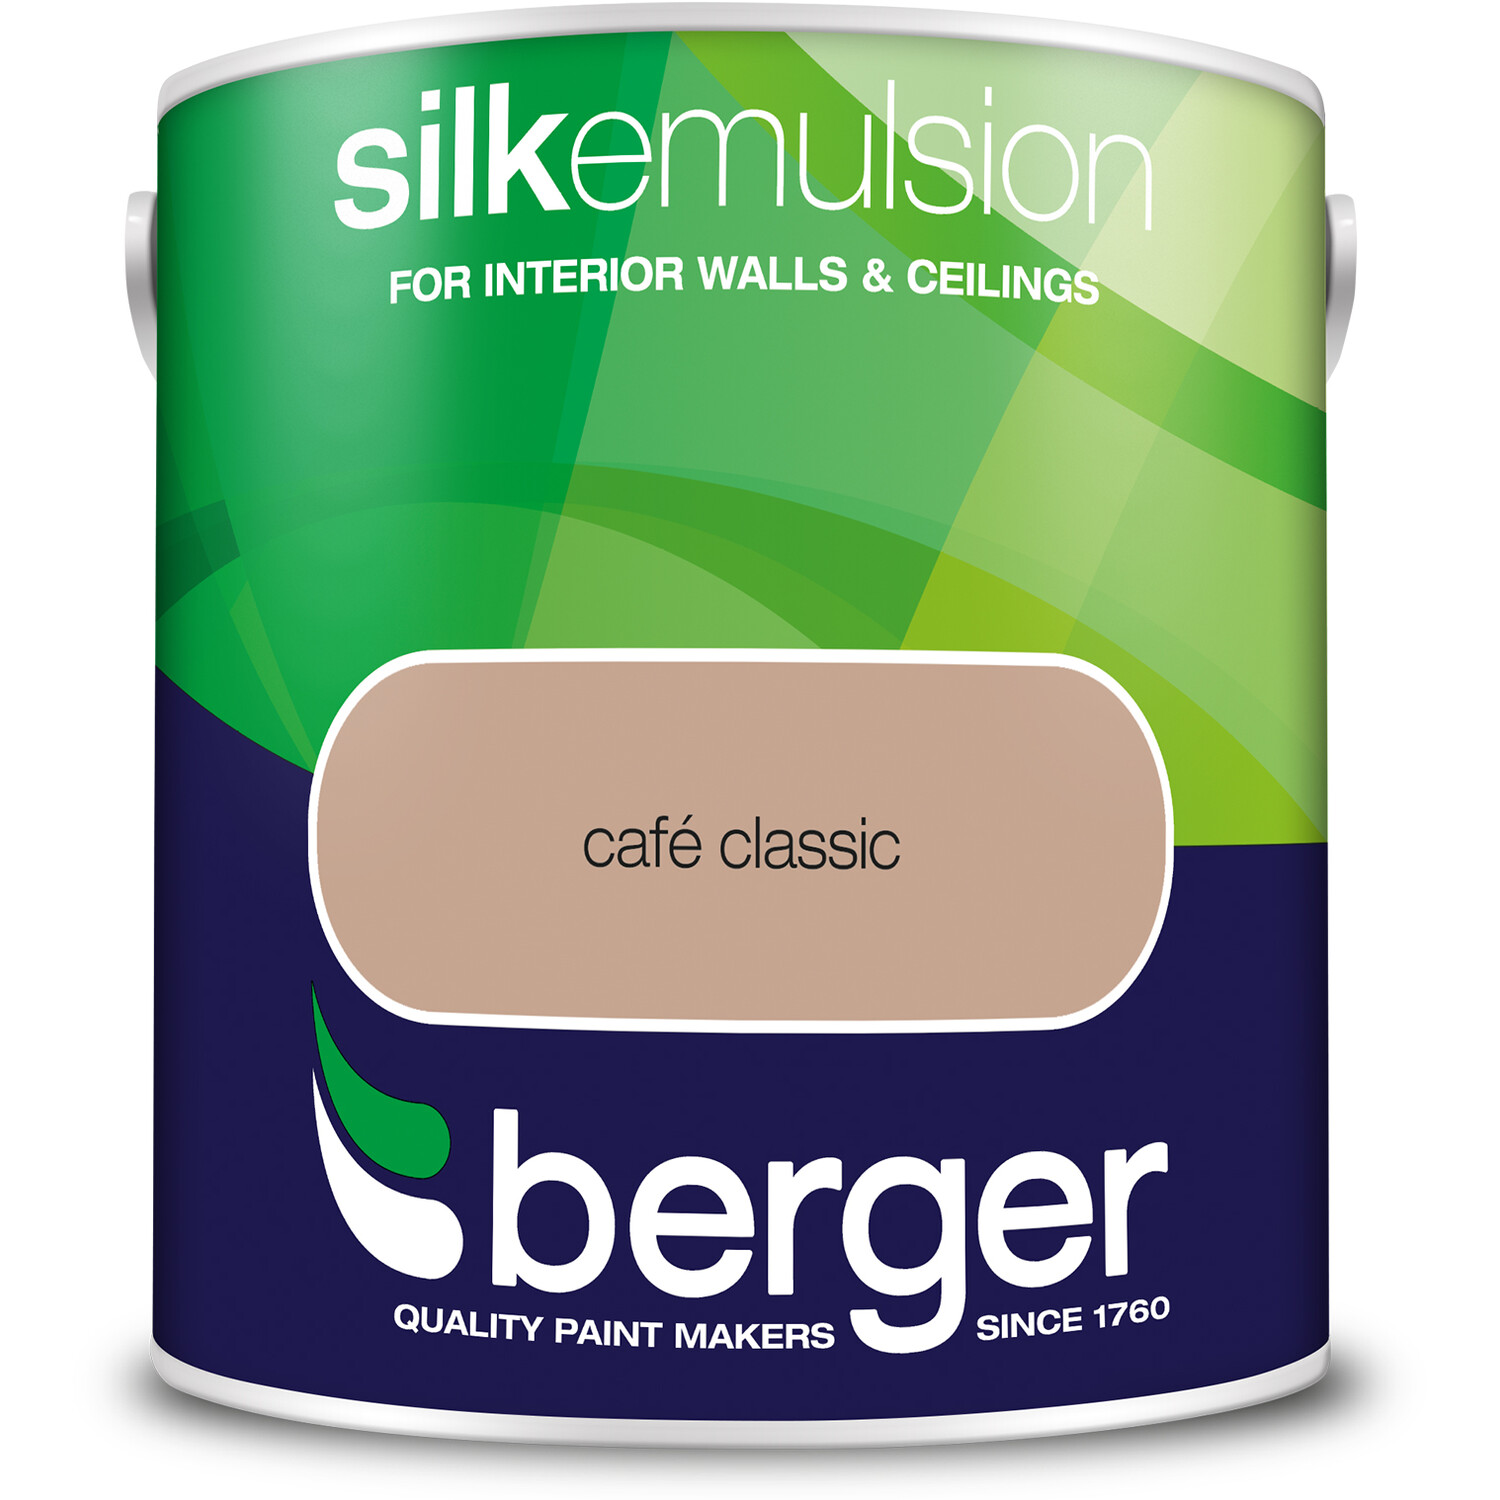 Berger Walls & Ceilings Cafe Classic Silk Emulsion Paint 2.5L Image 2